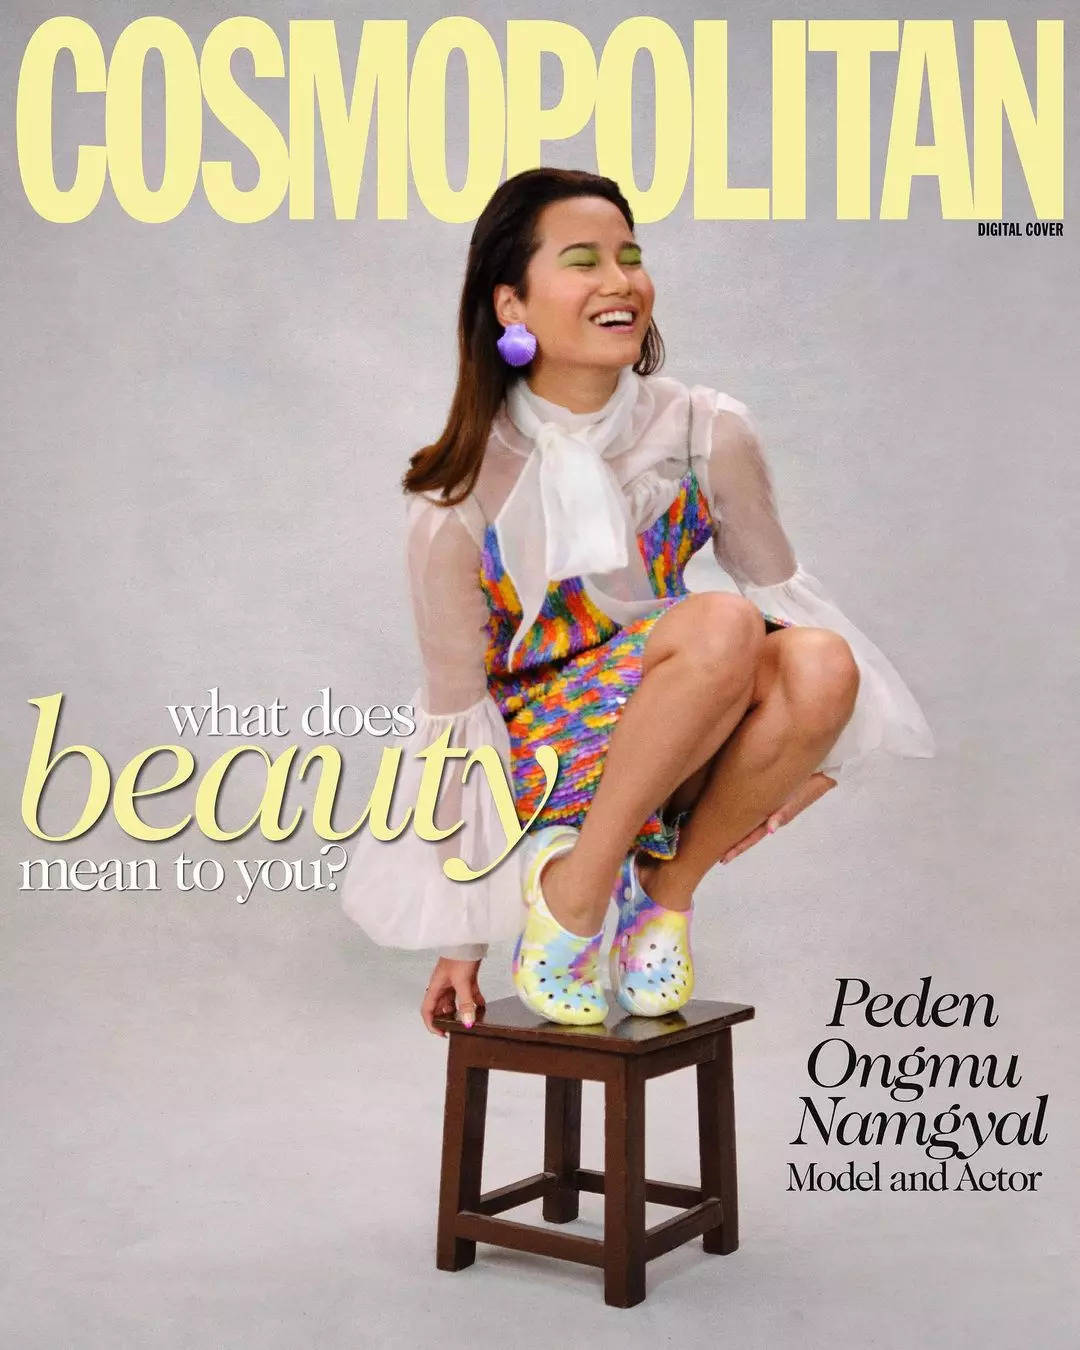 Peden Ongmu Namgyal features on the digital cover of Cosmopolitan India